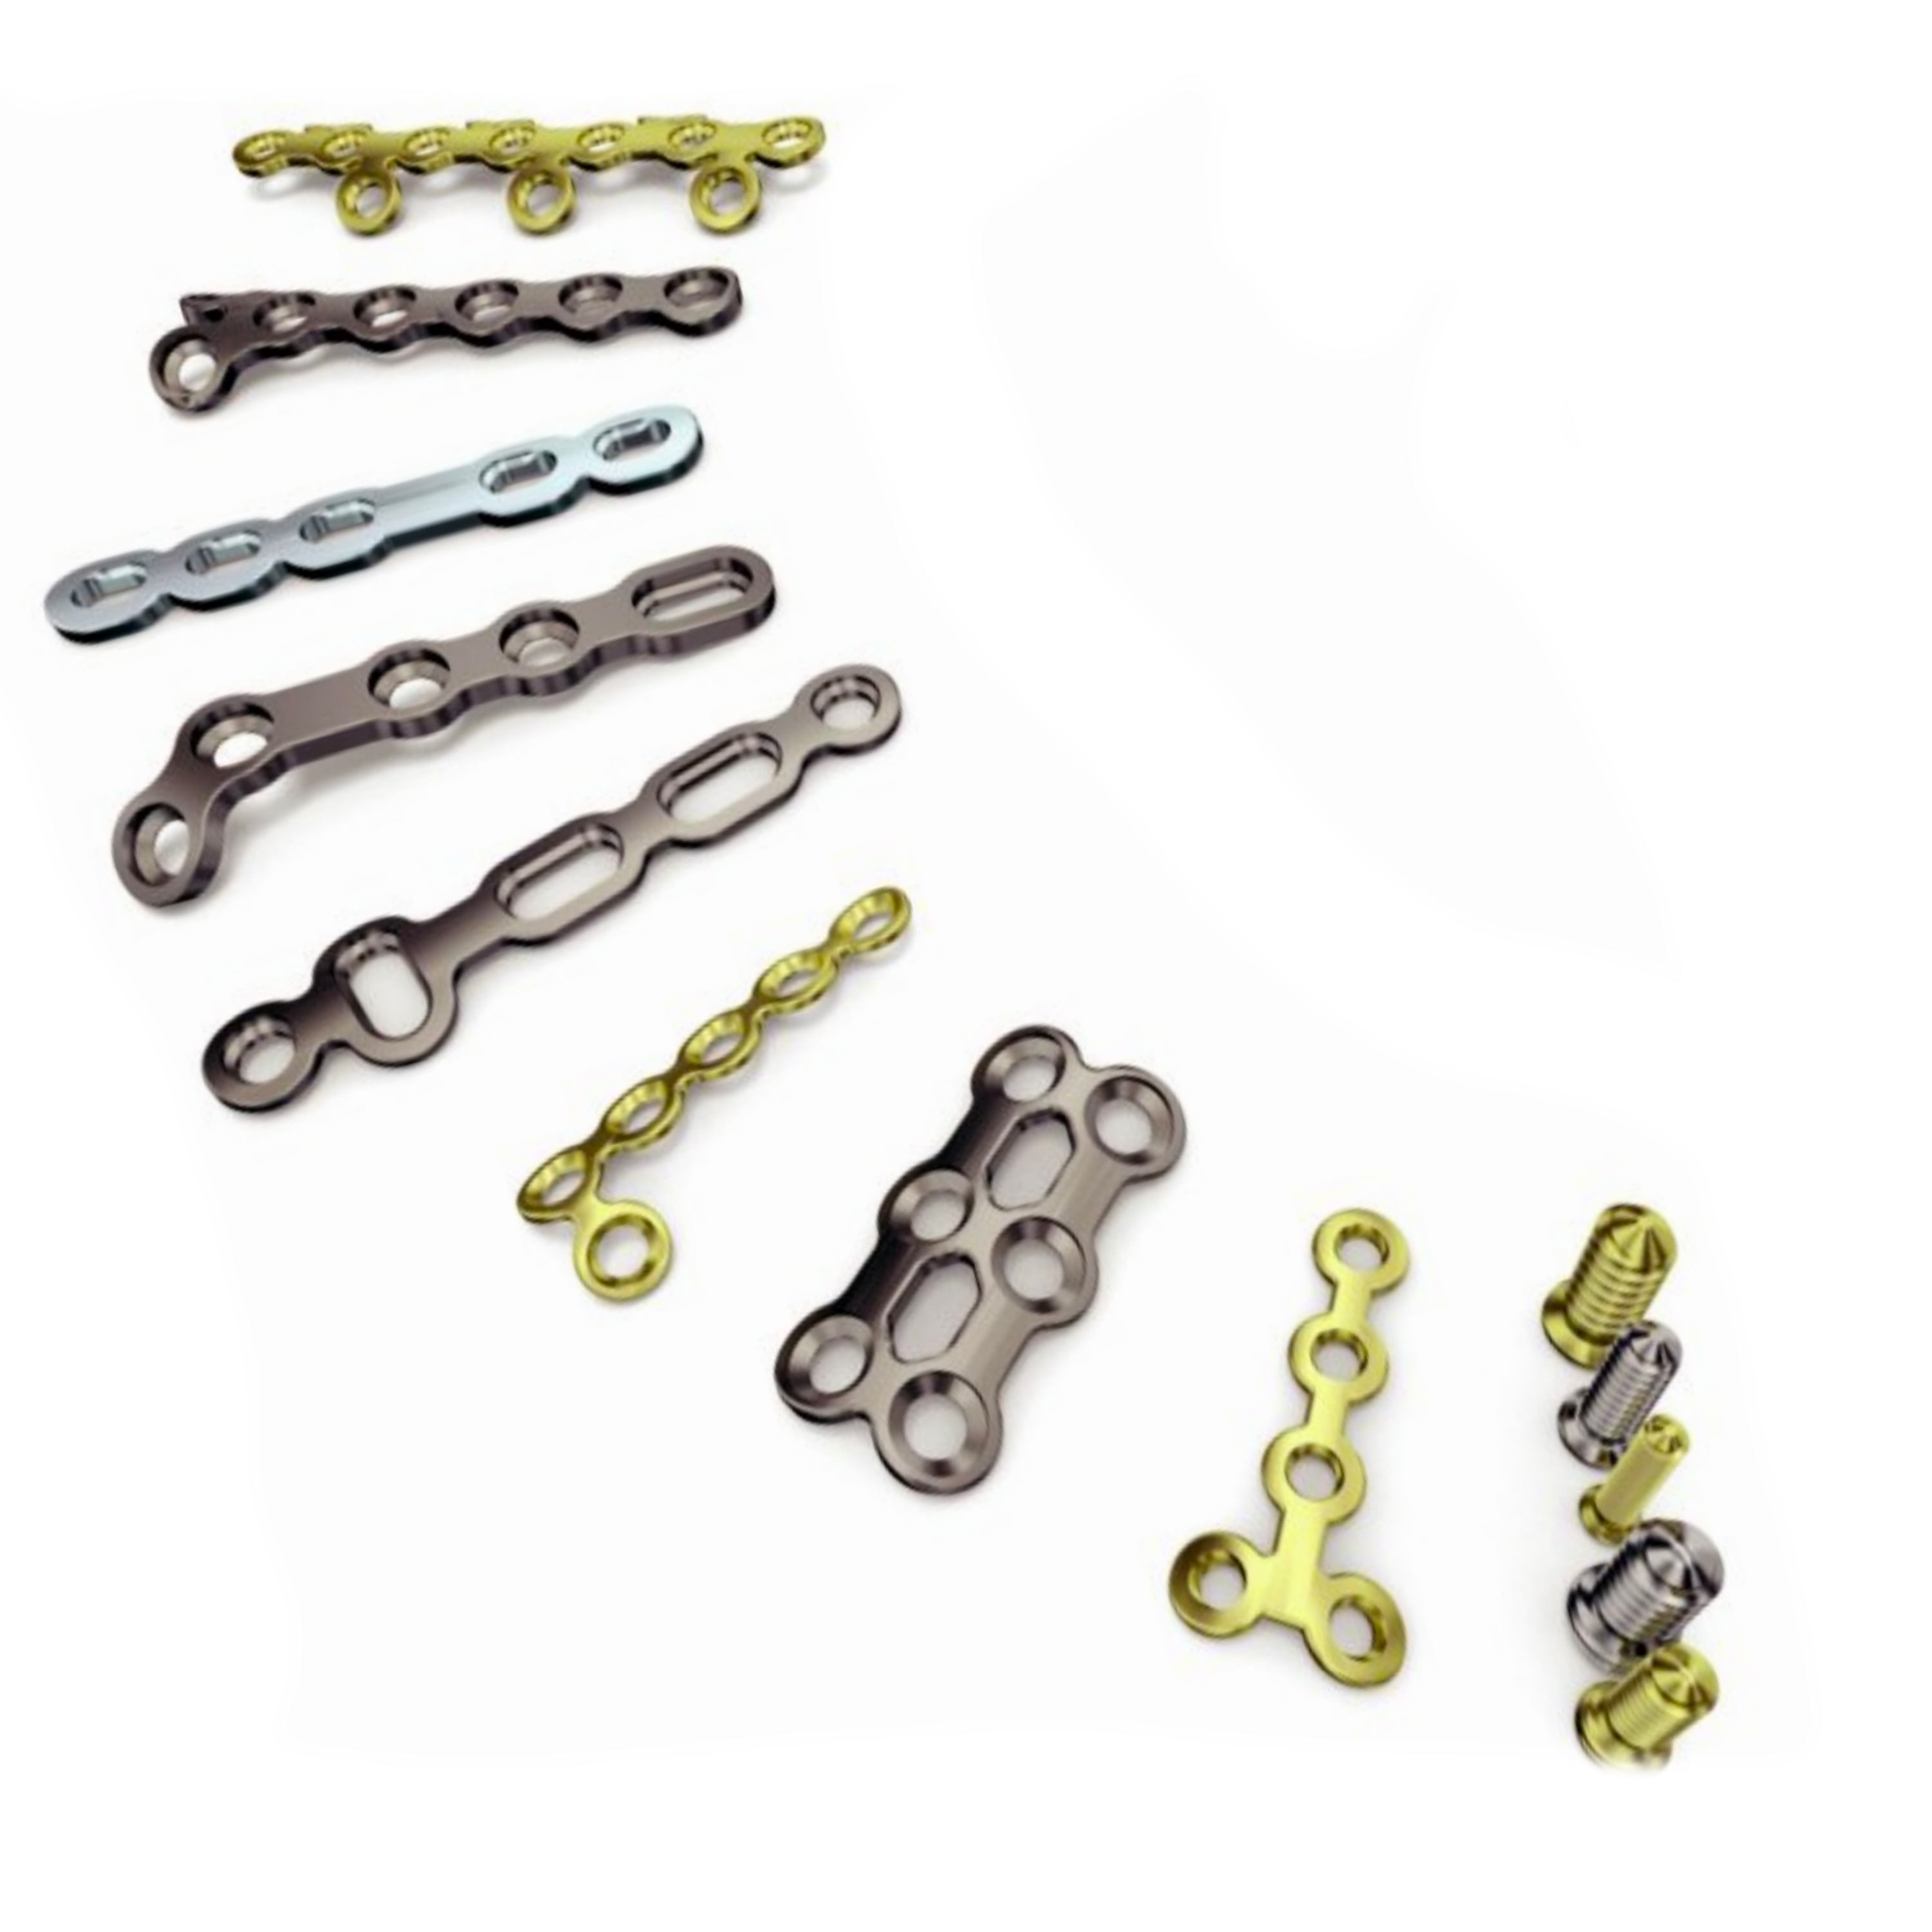 VariAx Hand Plating System | The VariAx Hand Locking Plate Module is a plating system which offers the potential benefits of variable angled locking plates and screws for 1.7mm and 2.3mm implant sizes.